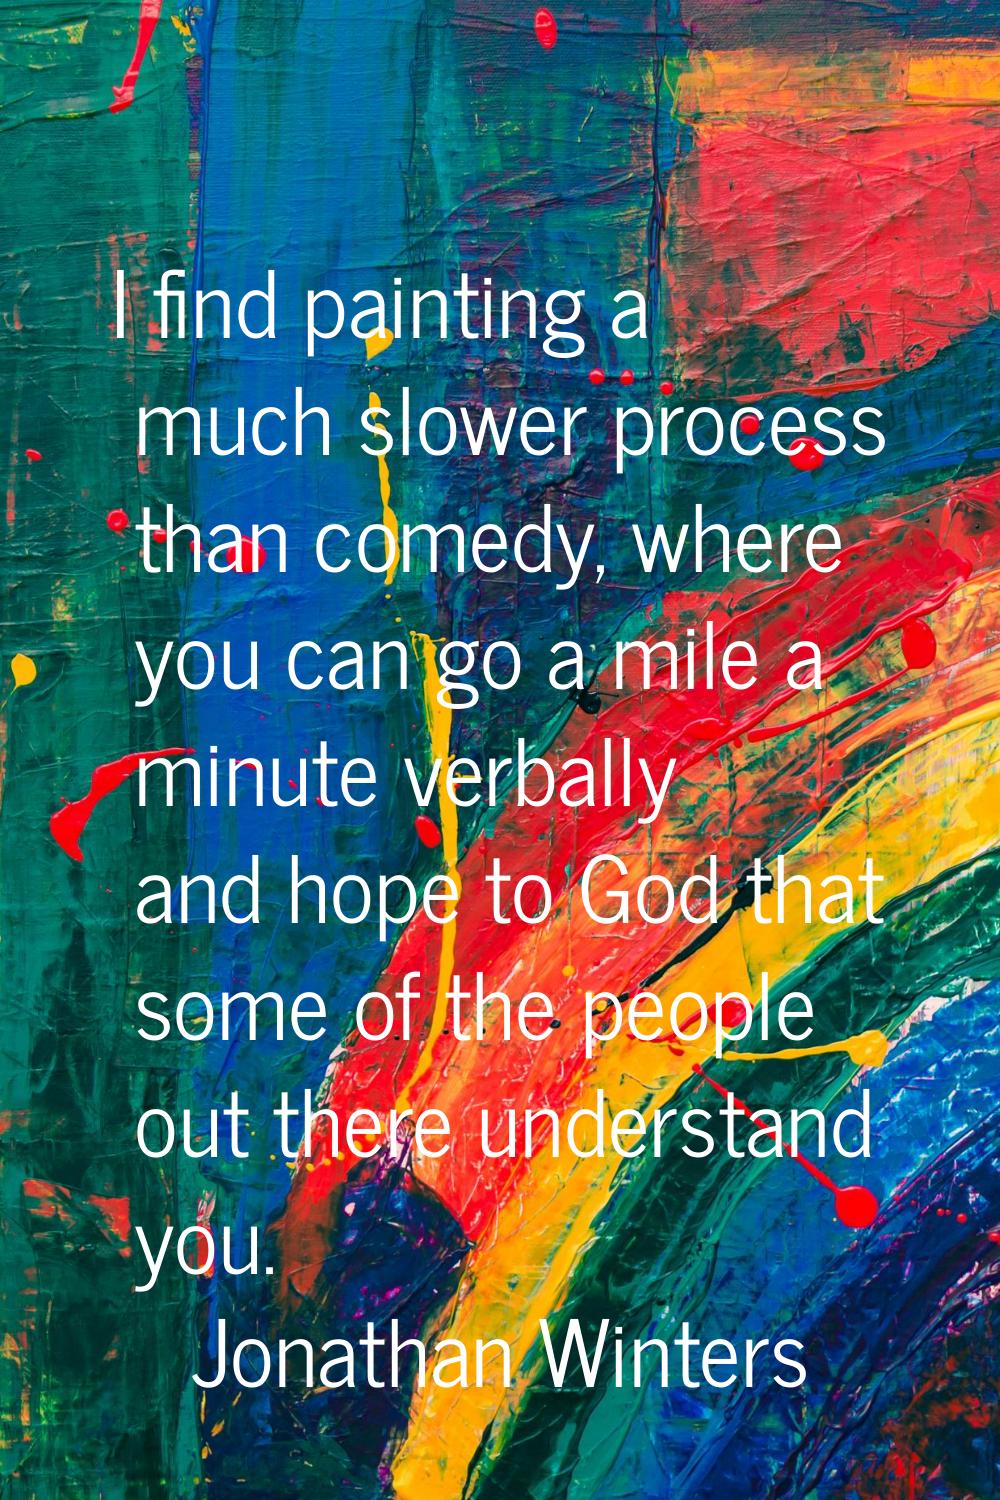 I find painting a much slower process than comedy, where you can go a mile a minute verbally and ho